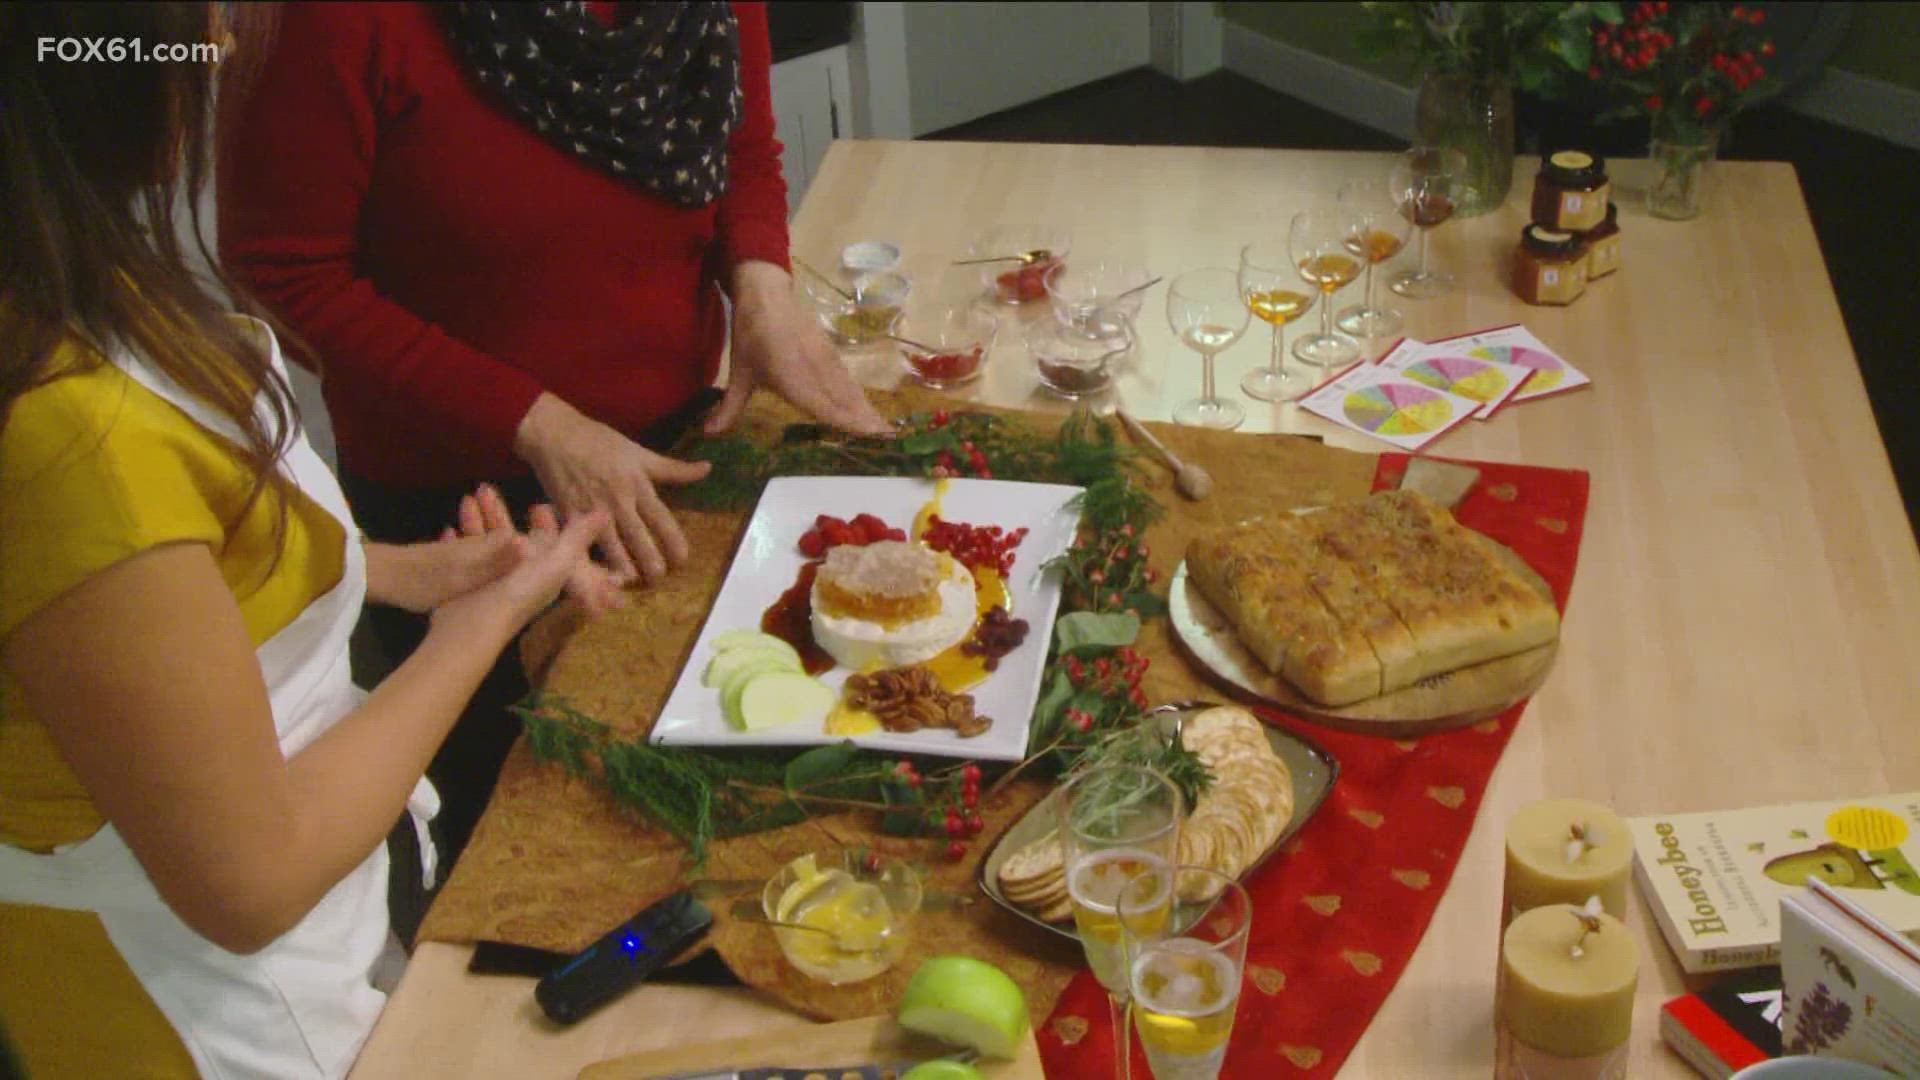 Marina Marchese, a Master Honey Sommelier, shows us how to make the perfect Honey board this holiday season.